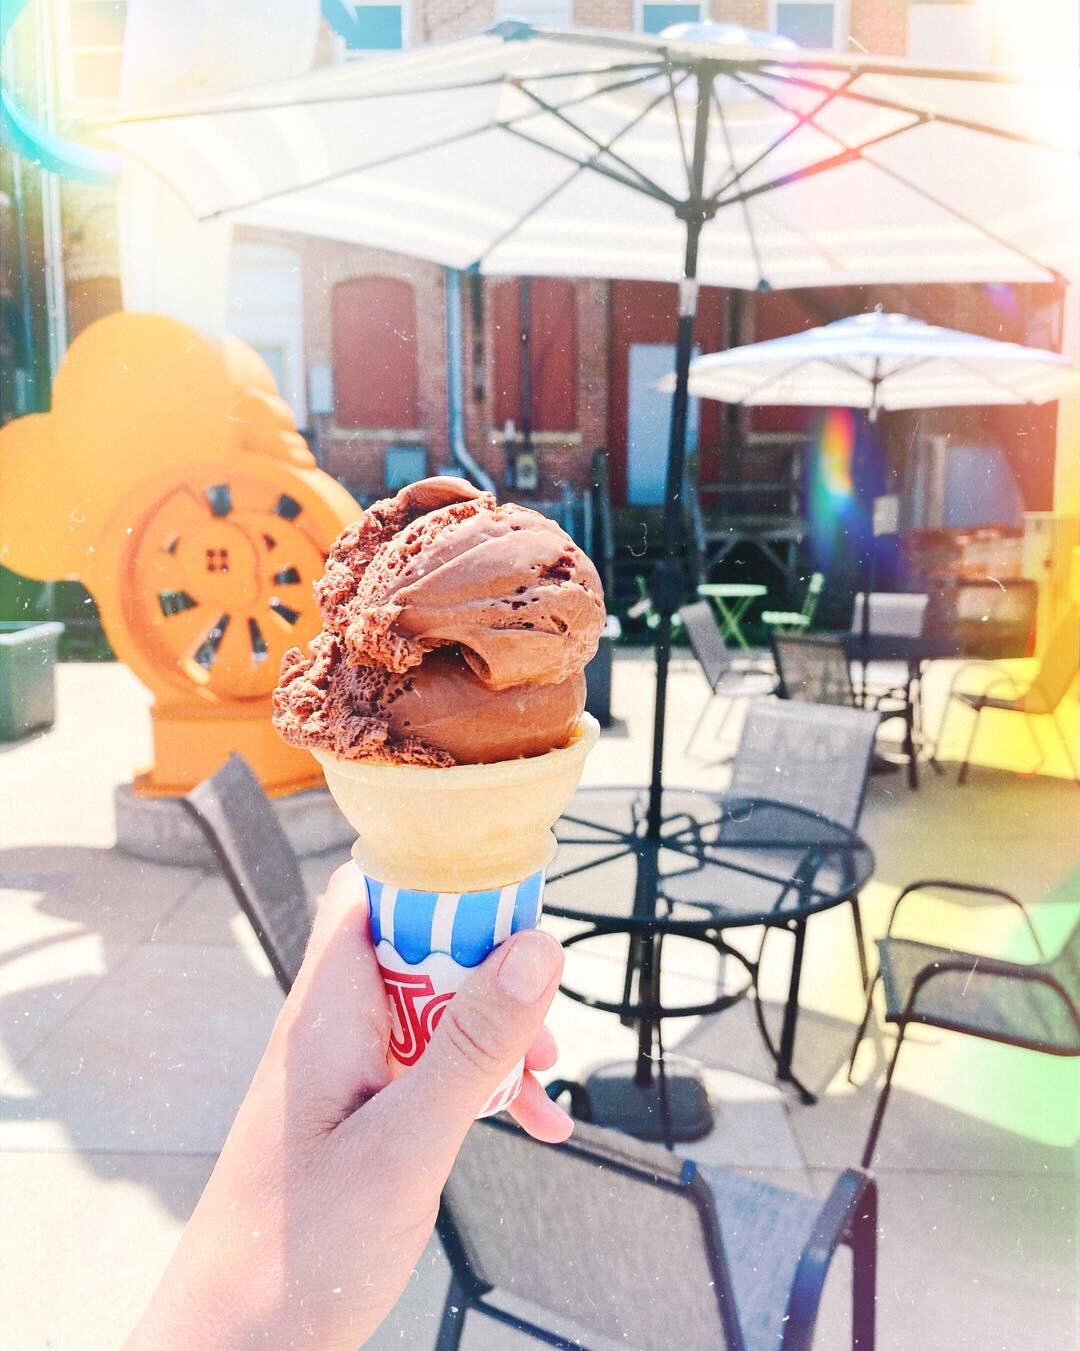 Heyyyyyyy you guyyyys!!!!! 

Our dreamy, creamy, dairy-free &amp; vegan gelato is 
👏 BACK 👏 IN 👏 STOCK 👏 

Current Flavors:
🌱 Vegan Chocolate Gelato
🌱 Vegan Indonesian Vanilla Bean Gelato 

📷 look at this delicious cone; sure to satisfy any ic